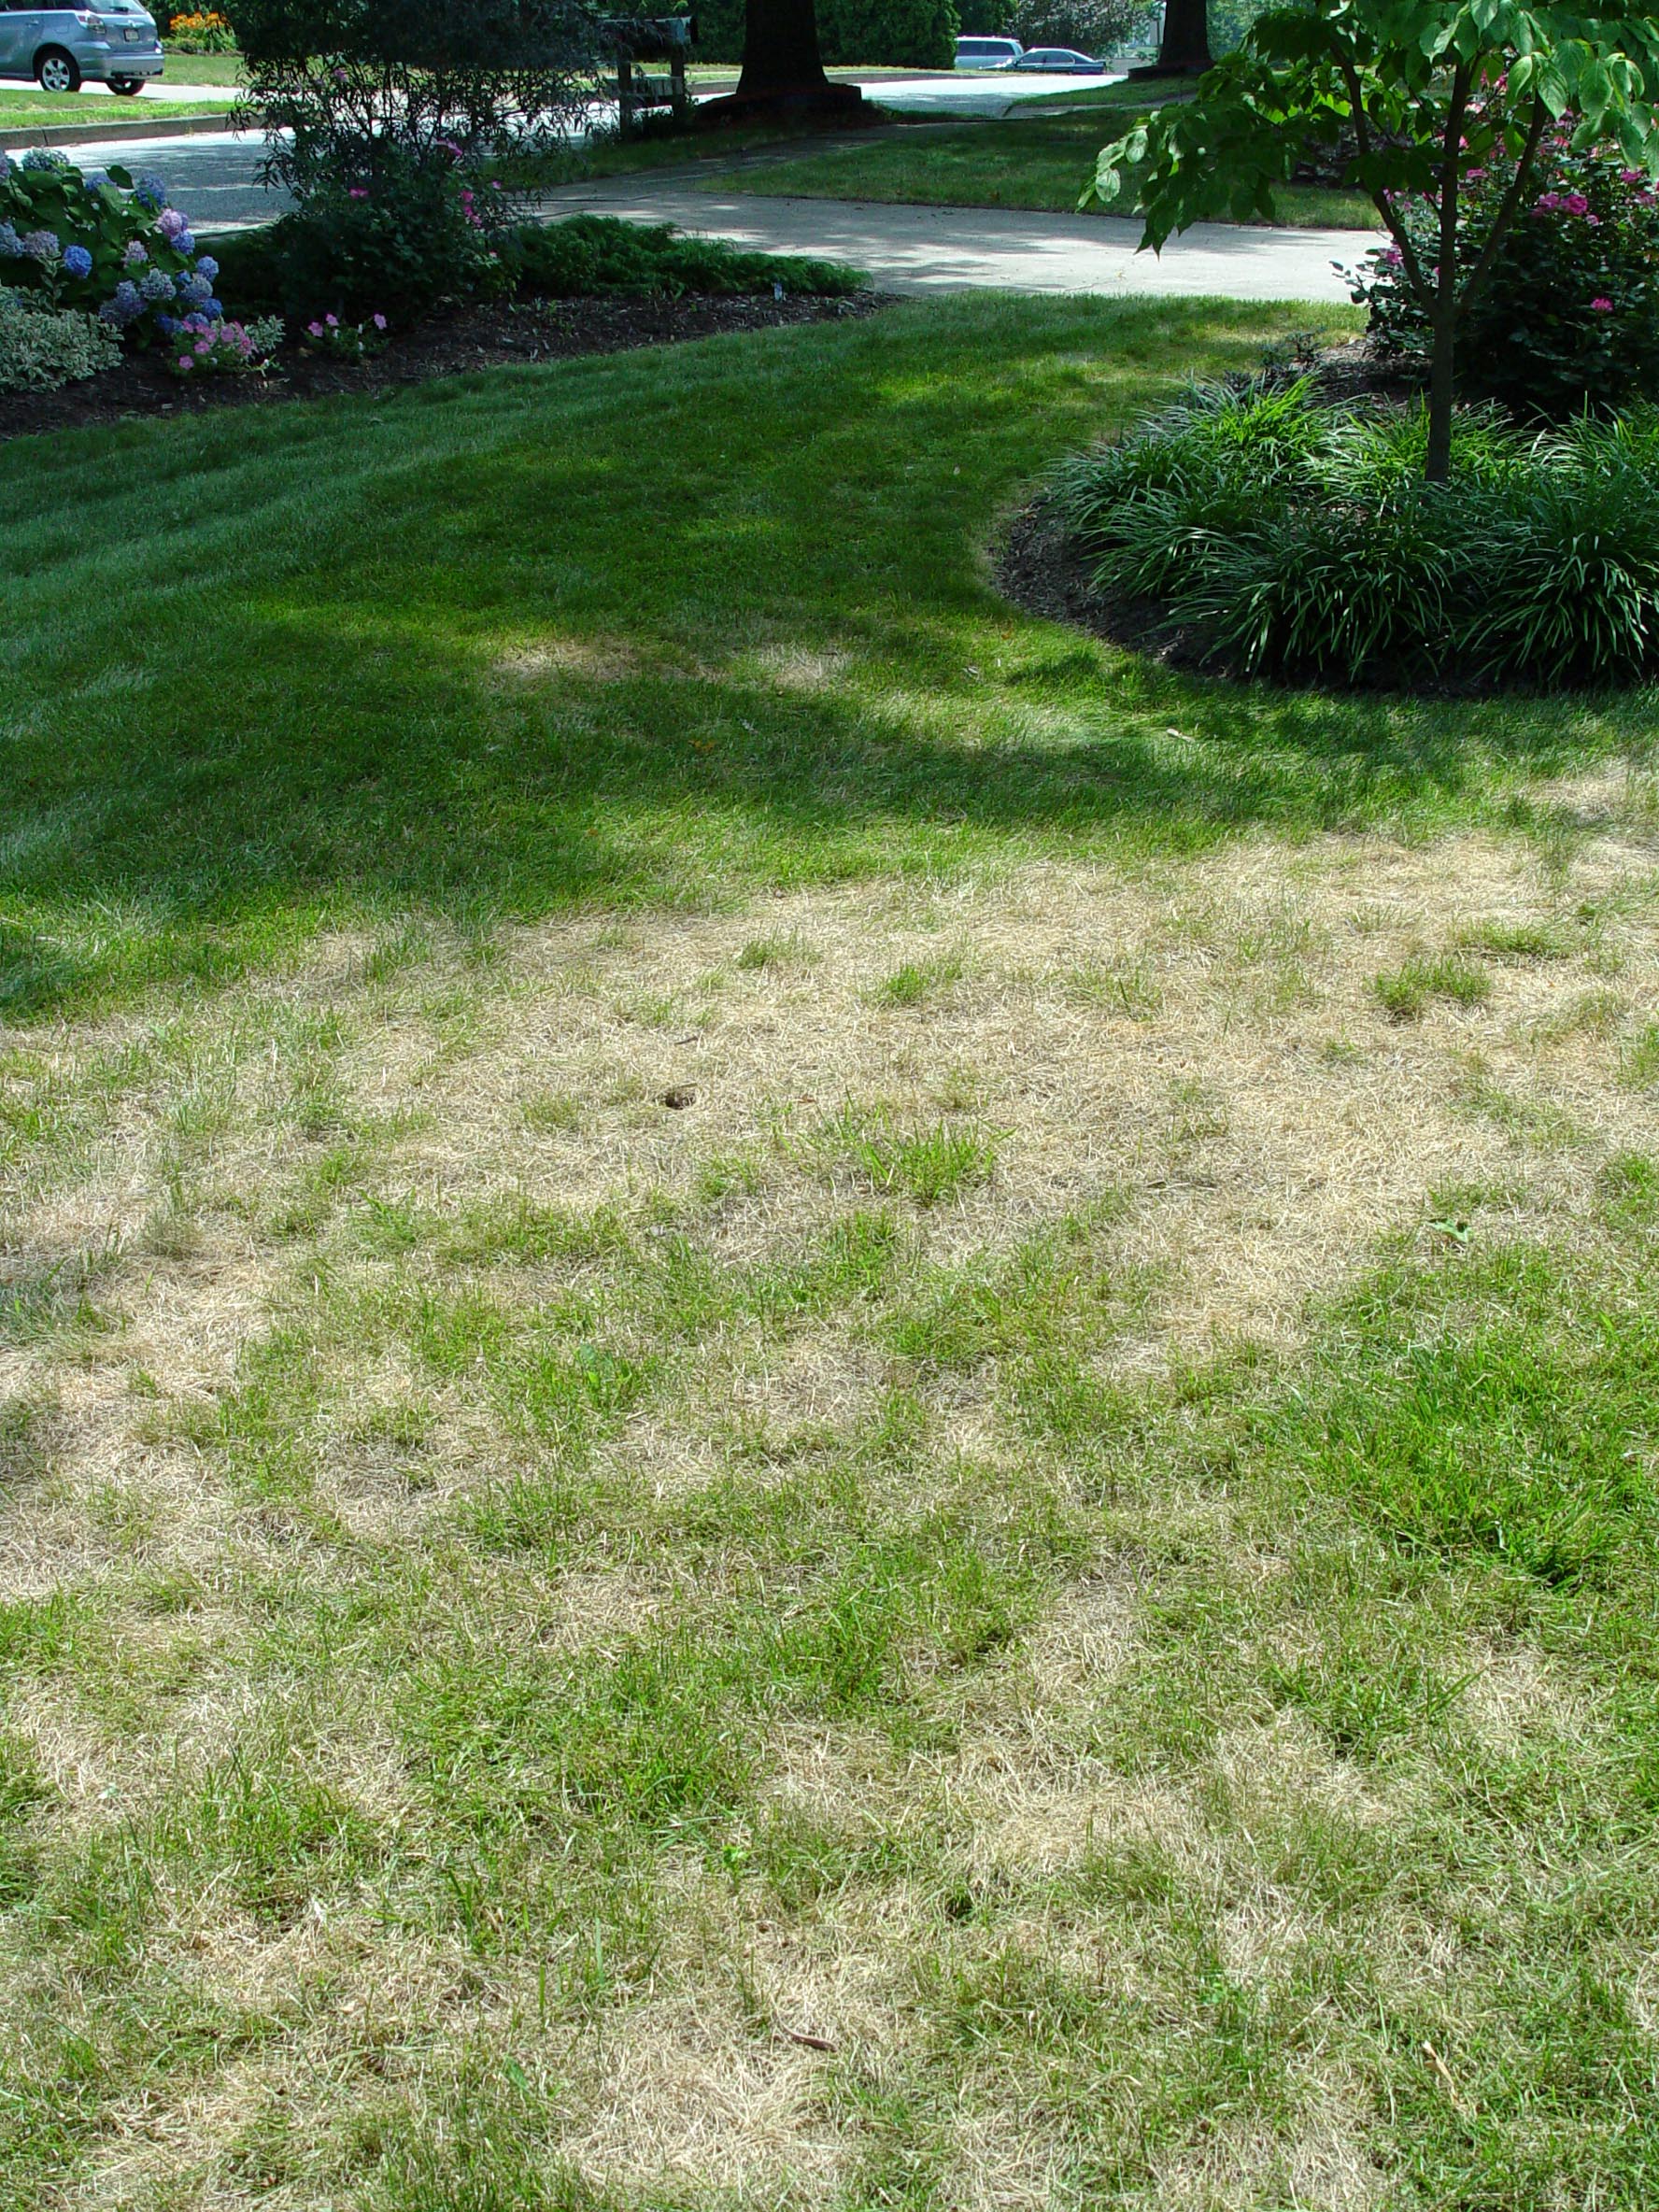 How to Reseed a Dead Lawn? 